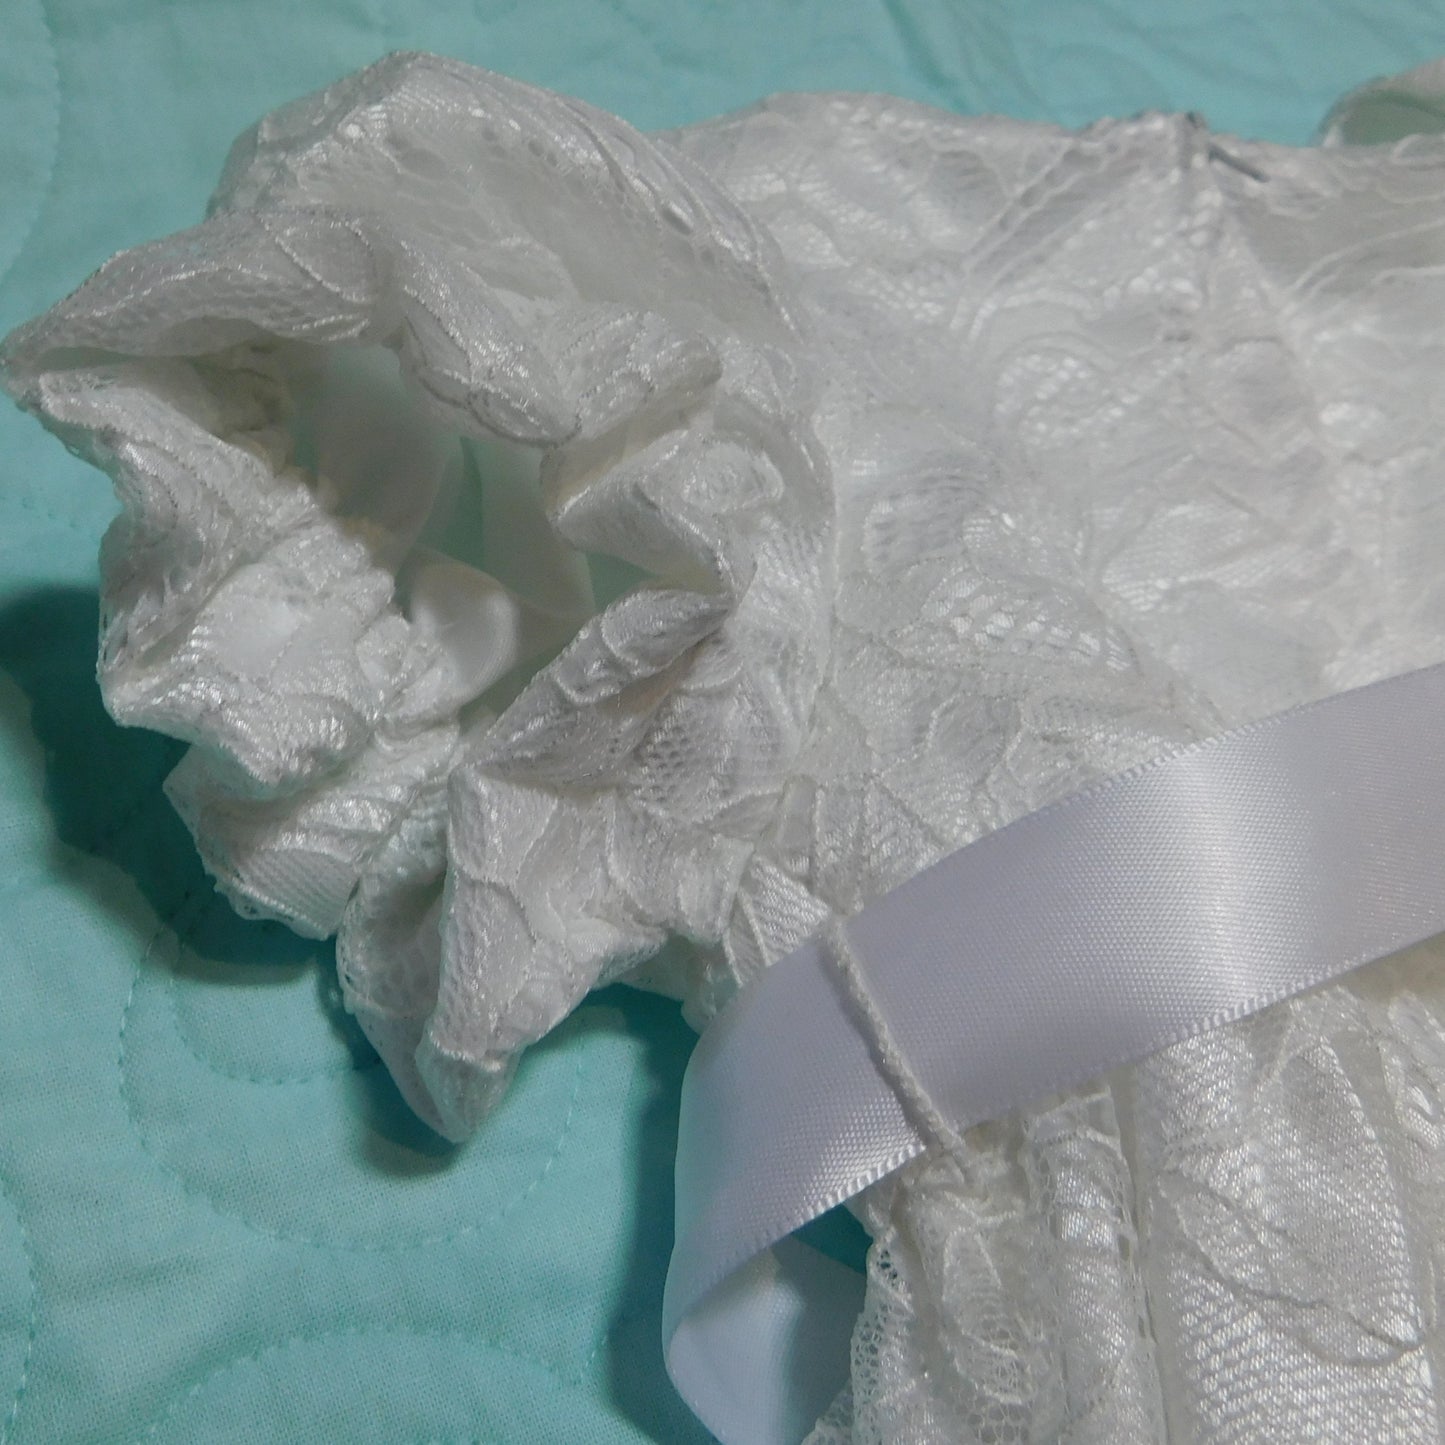 Christening Dress / Gown - Dedication Dress / Gown  White Satin and Lace